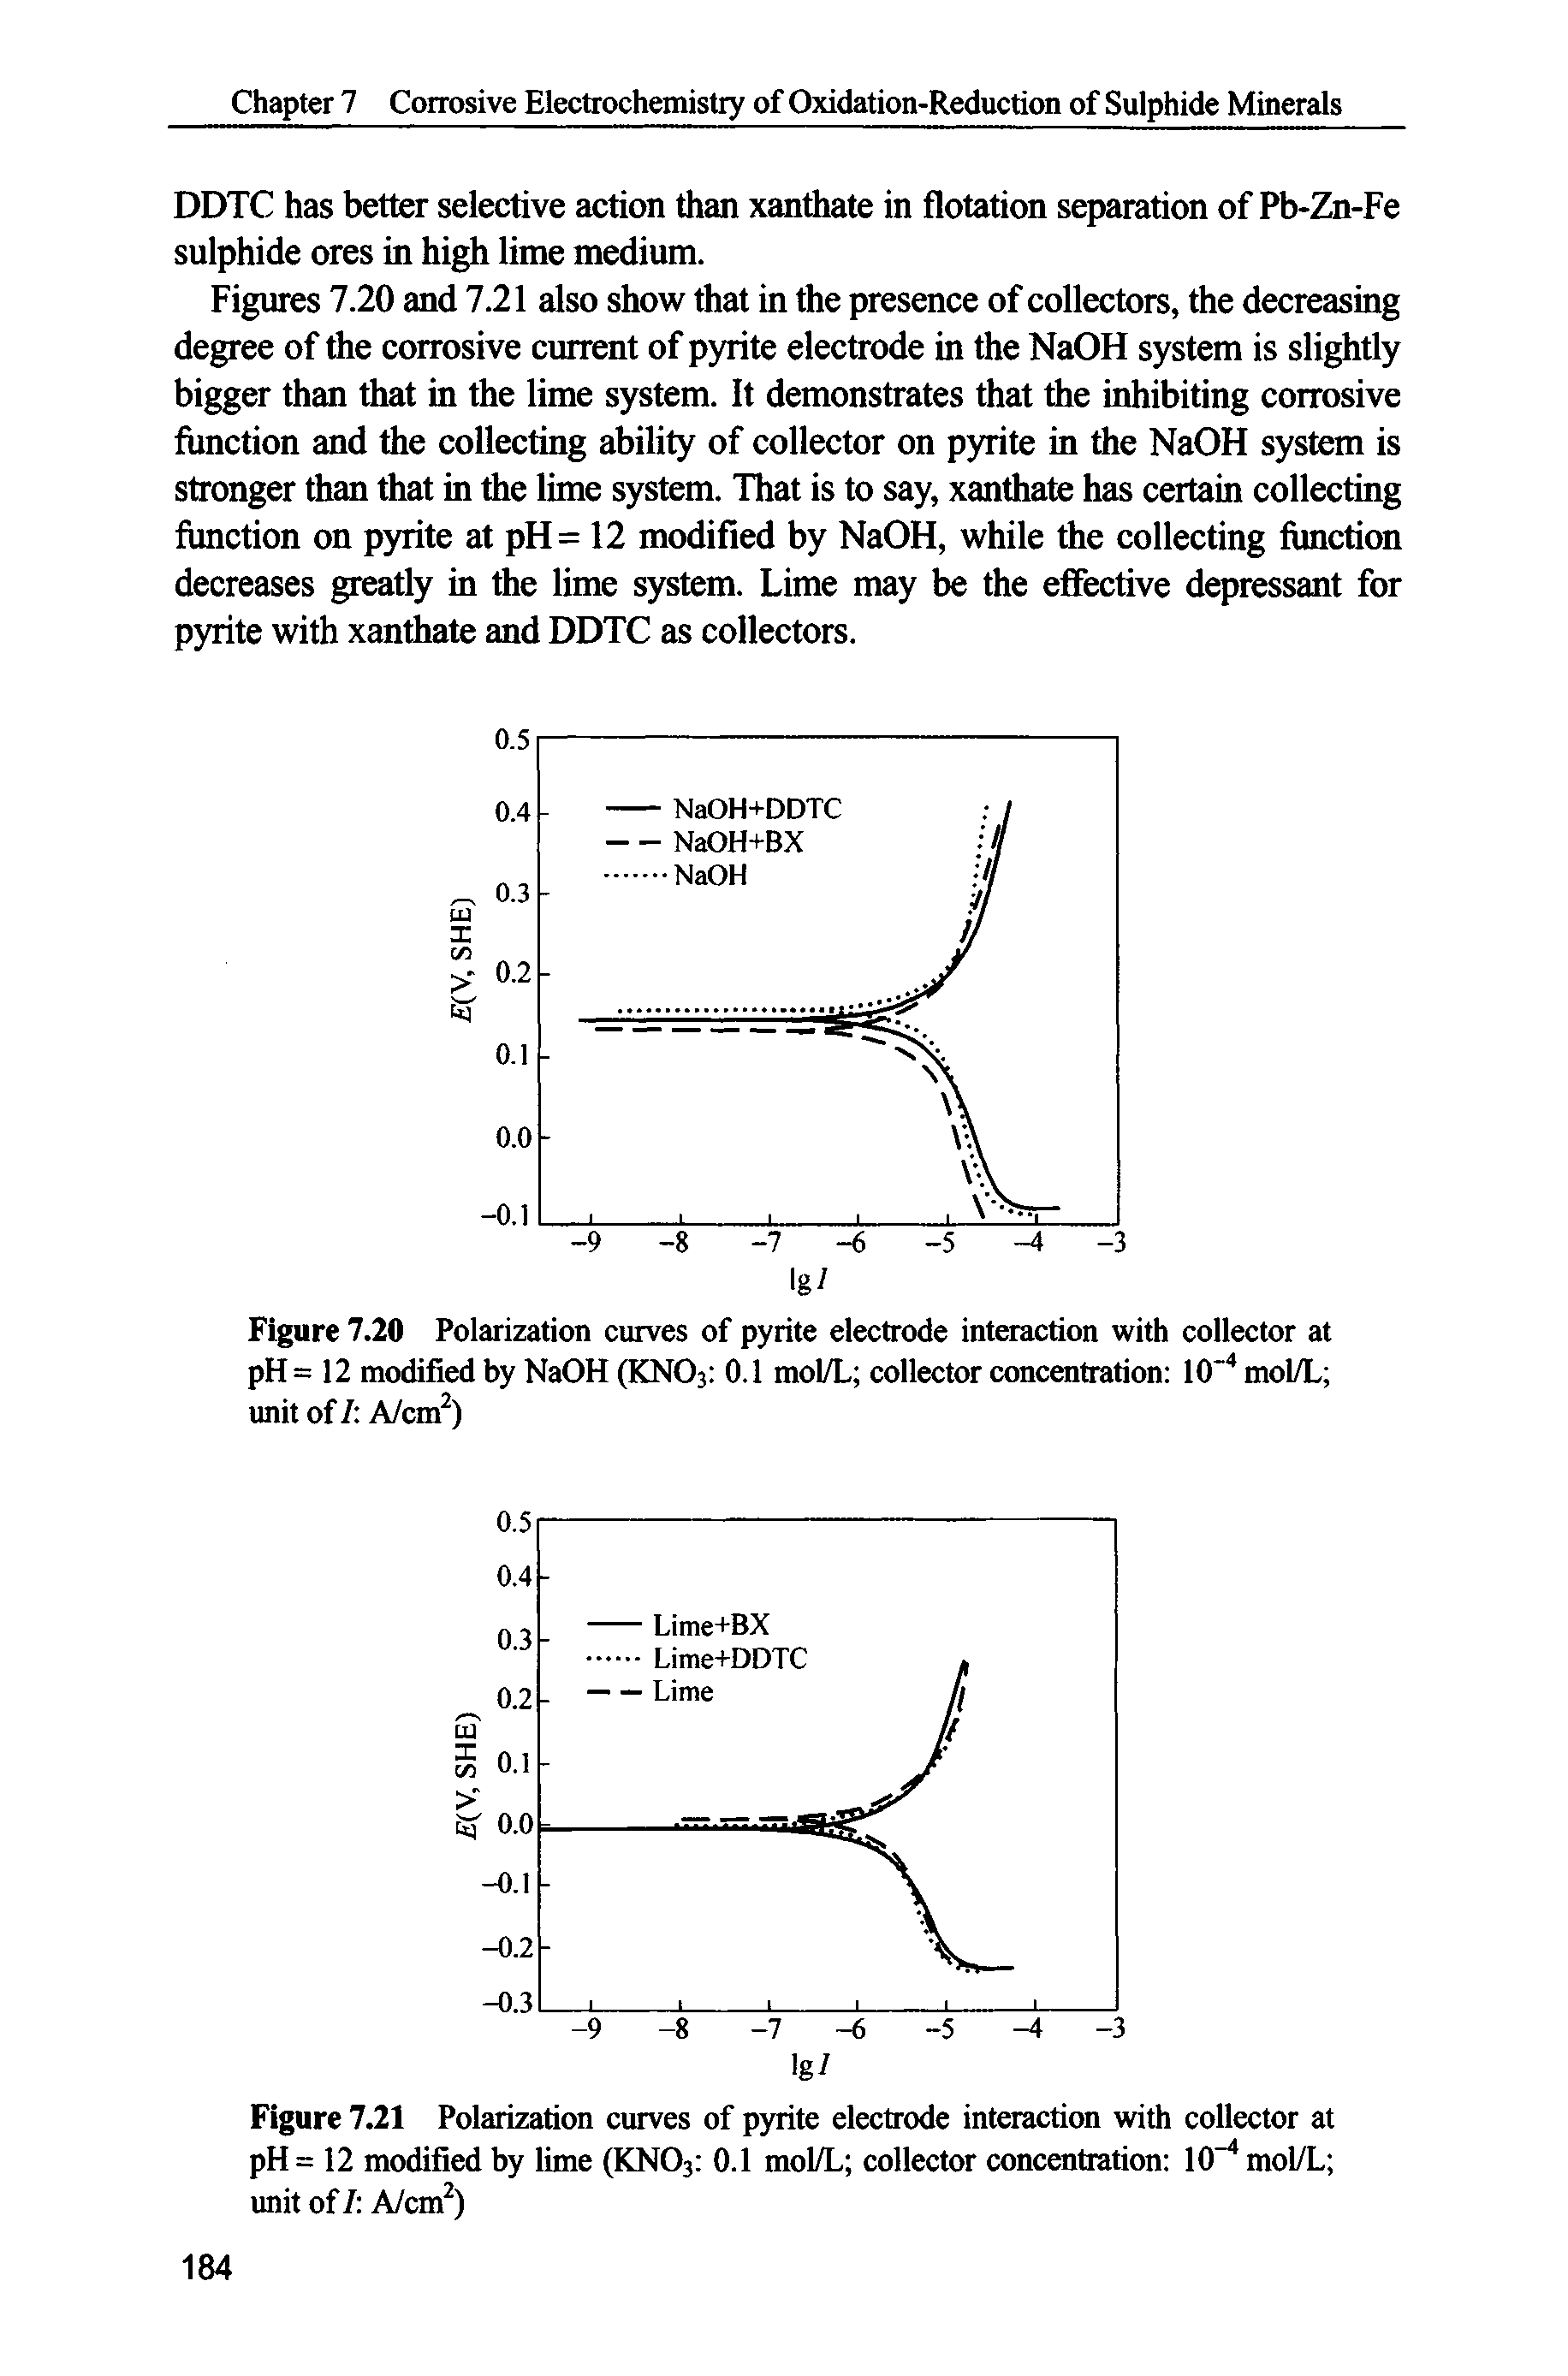 Figure 7.20 Polarization curves of pyrite electrode interaction with collector at pH = 12 modified by NaOH (KNO3 0.1 mol/L collector concentration 10" mol/L unitof/ A/em )...